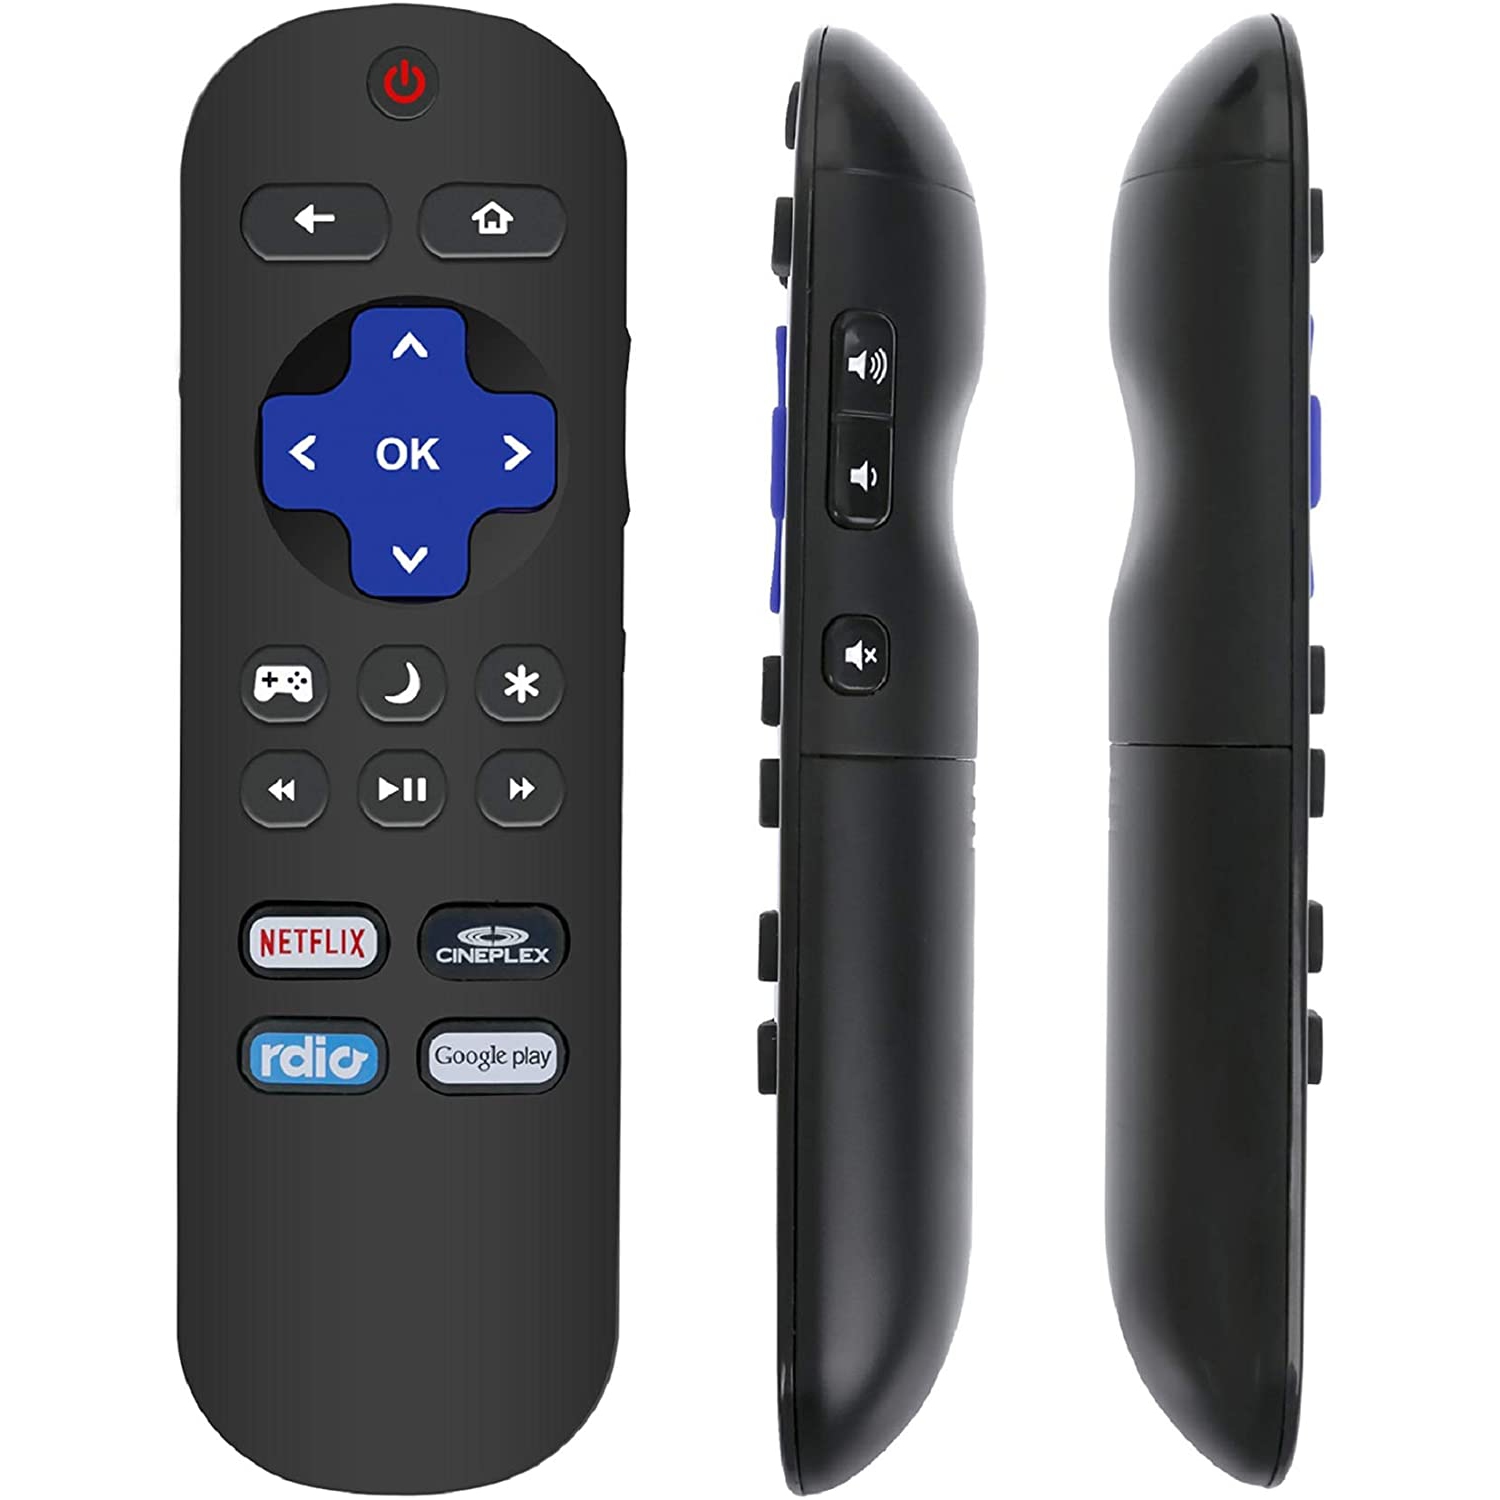 New Remote Control fit for Sharp Roku TV LC-50LB371C LC-55LB481U LC-43LB481U LC-32LB481U LC-50LB481U LC-43LB371U